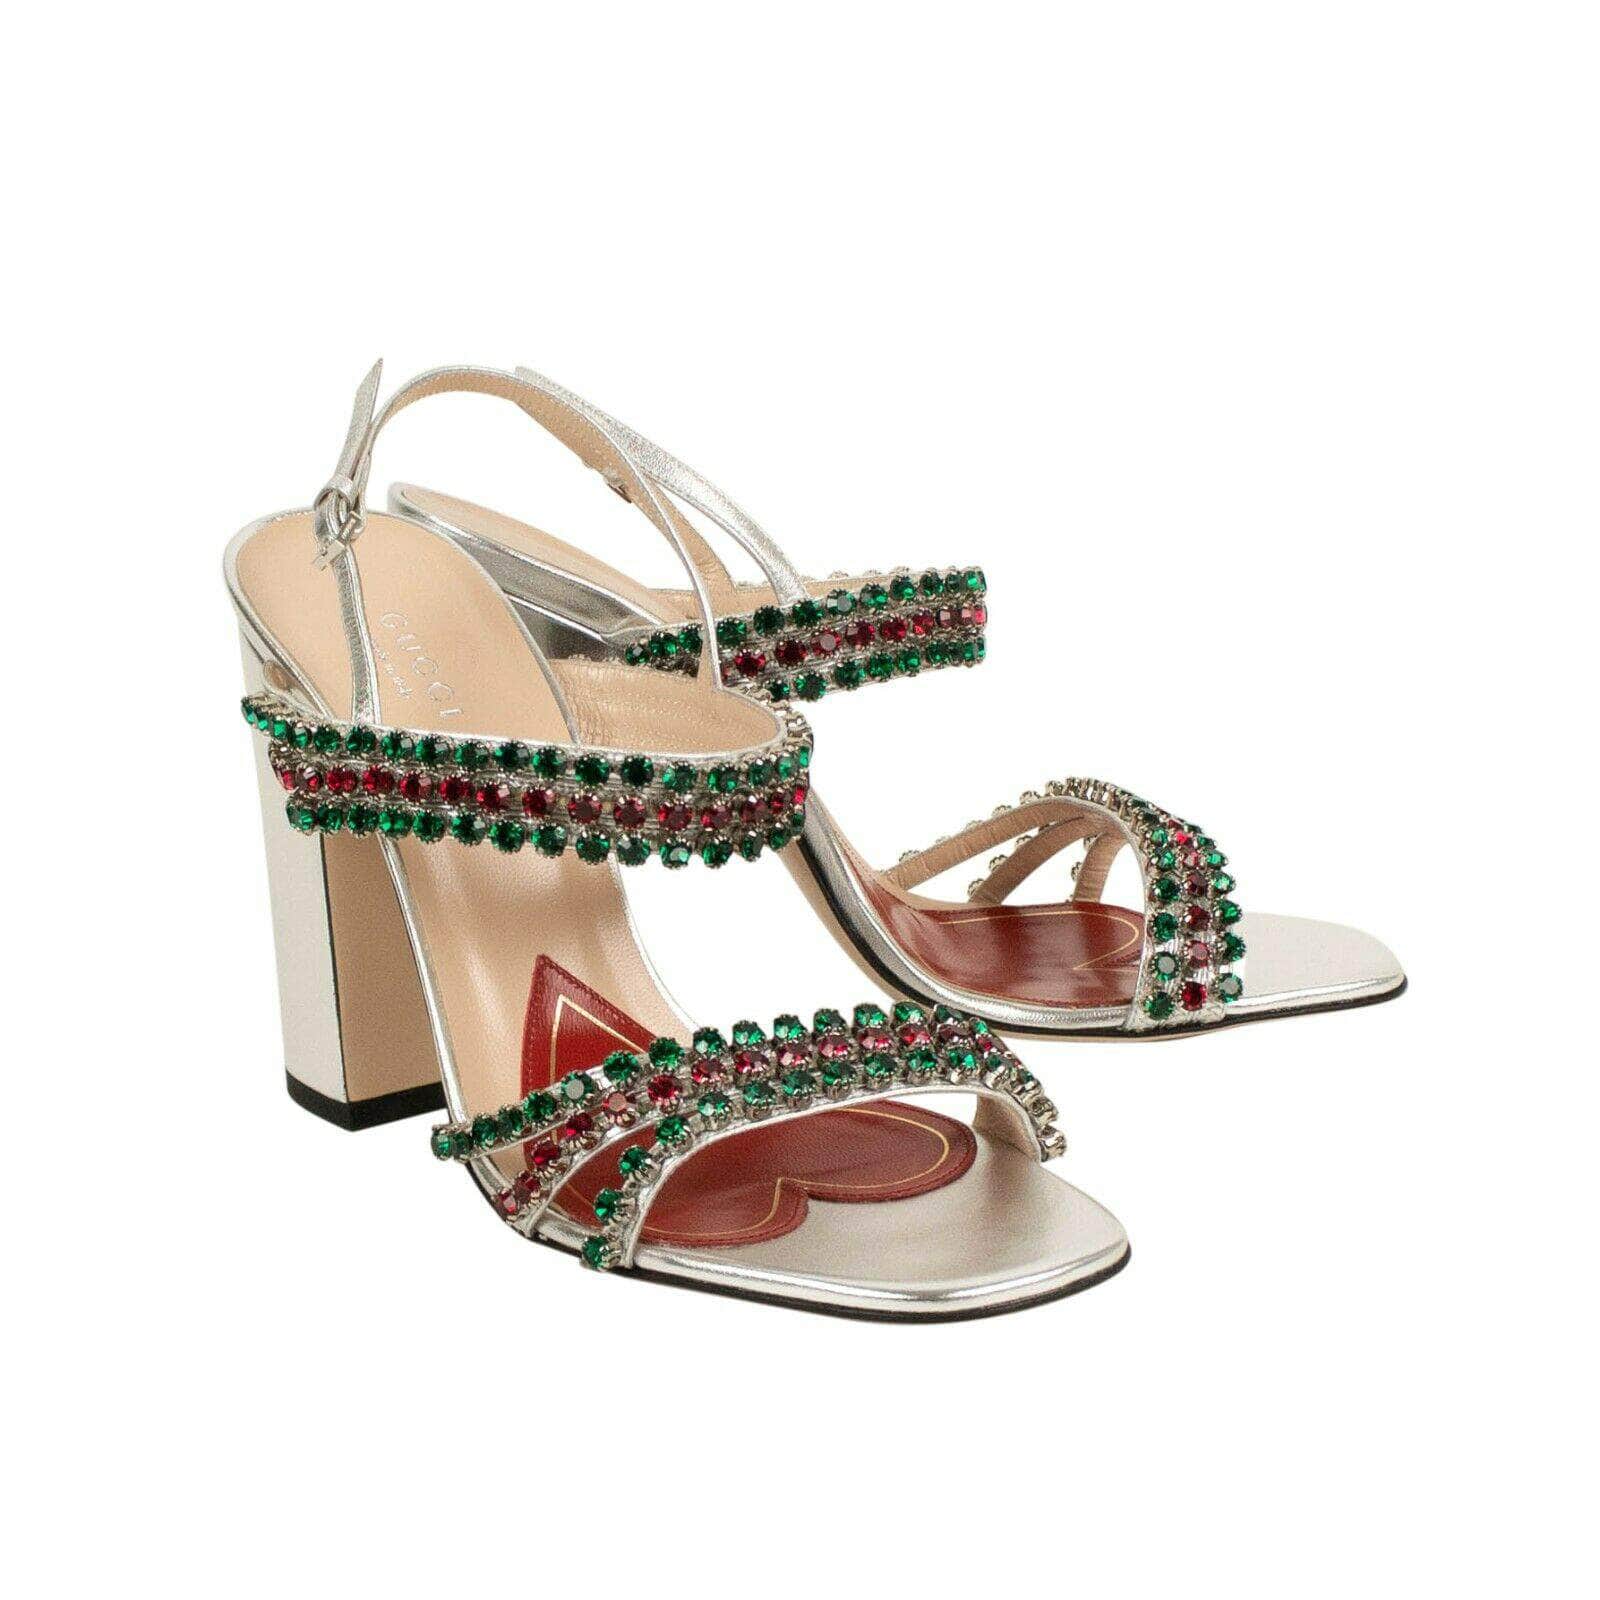 Gucci 500-750, channelenable-all, chicmi, couponcollection, gender-womens, gucci, main-shoes, shop375, size-8, womens-pumps-heels 8 Silver Leather With Red And Green Crystals Sandals 8/38 69LE-2652/8 69LE-2652/8